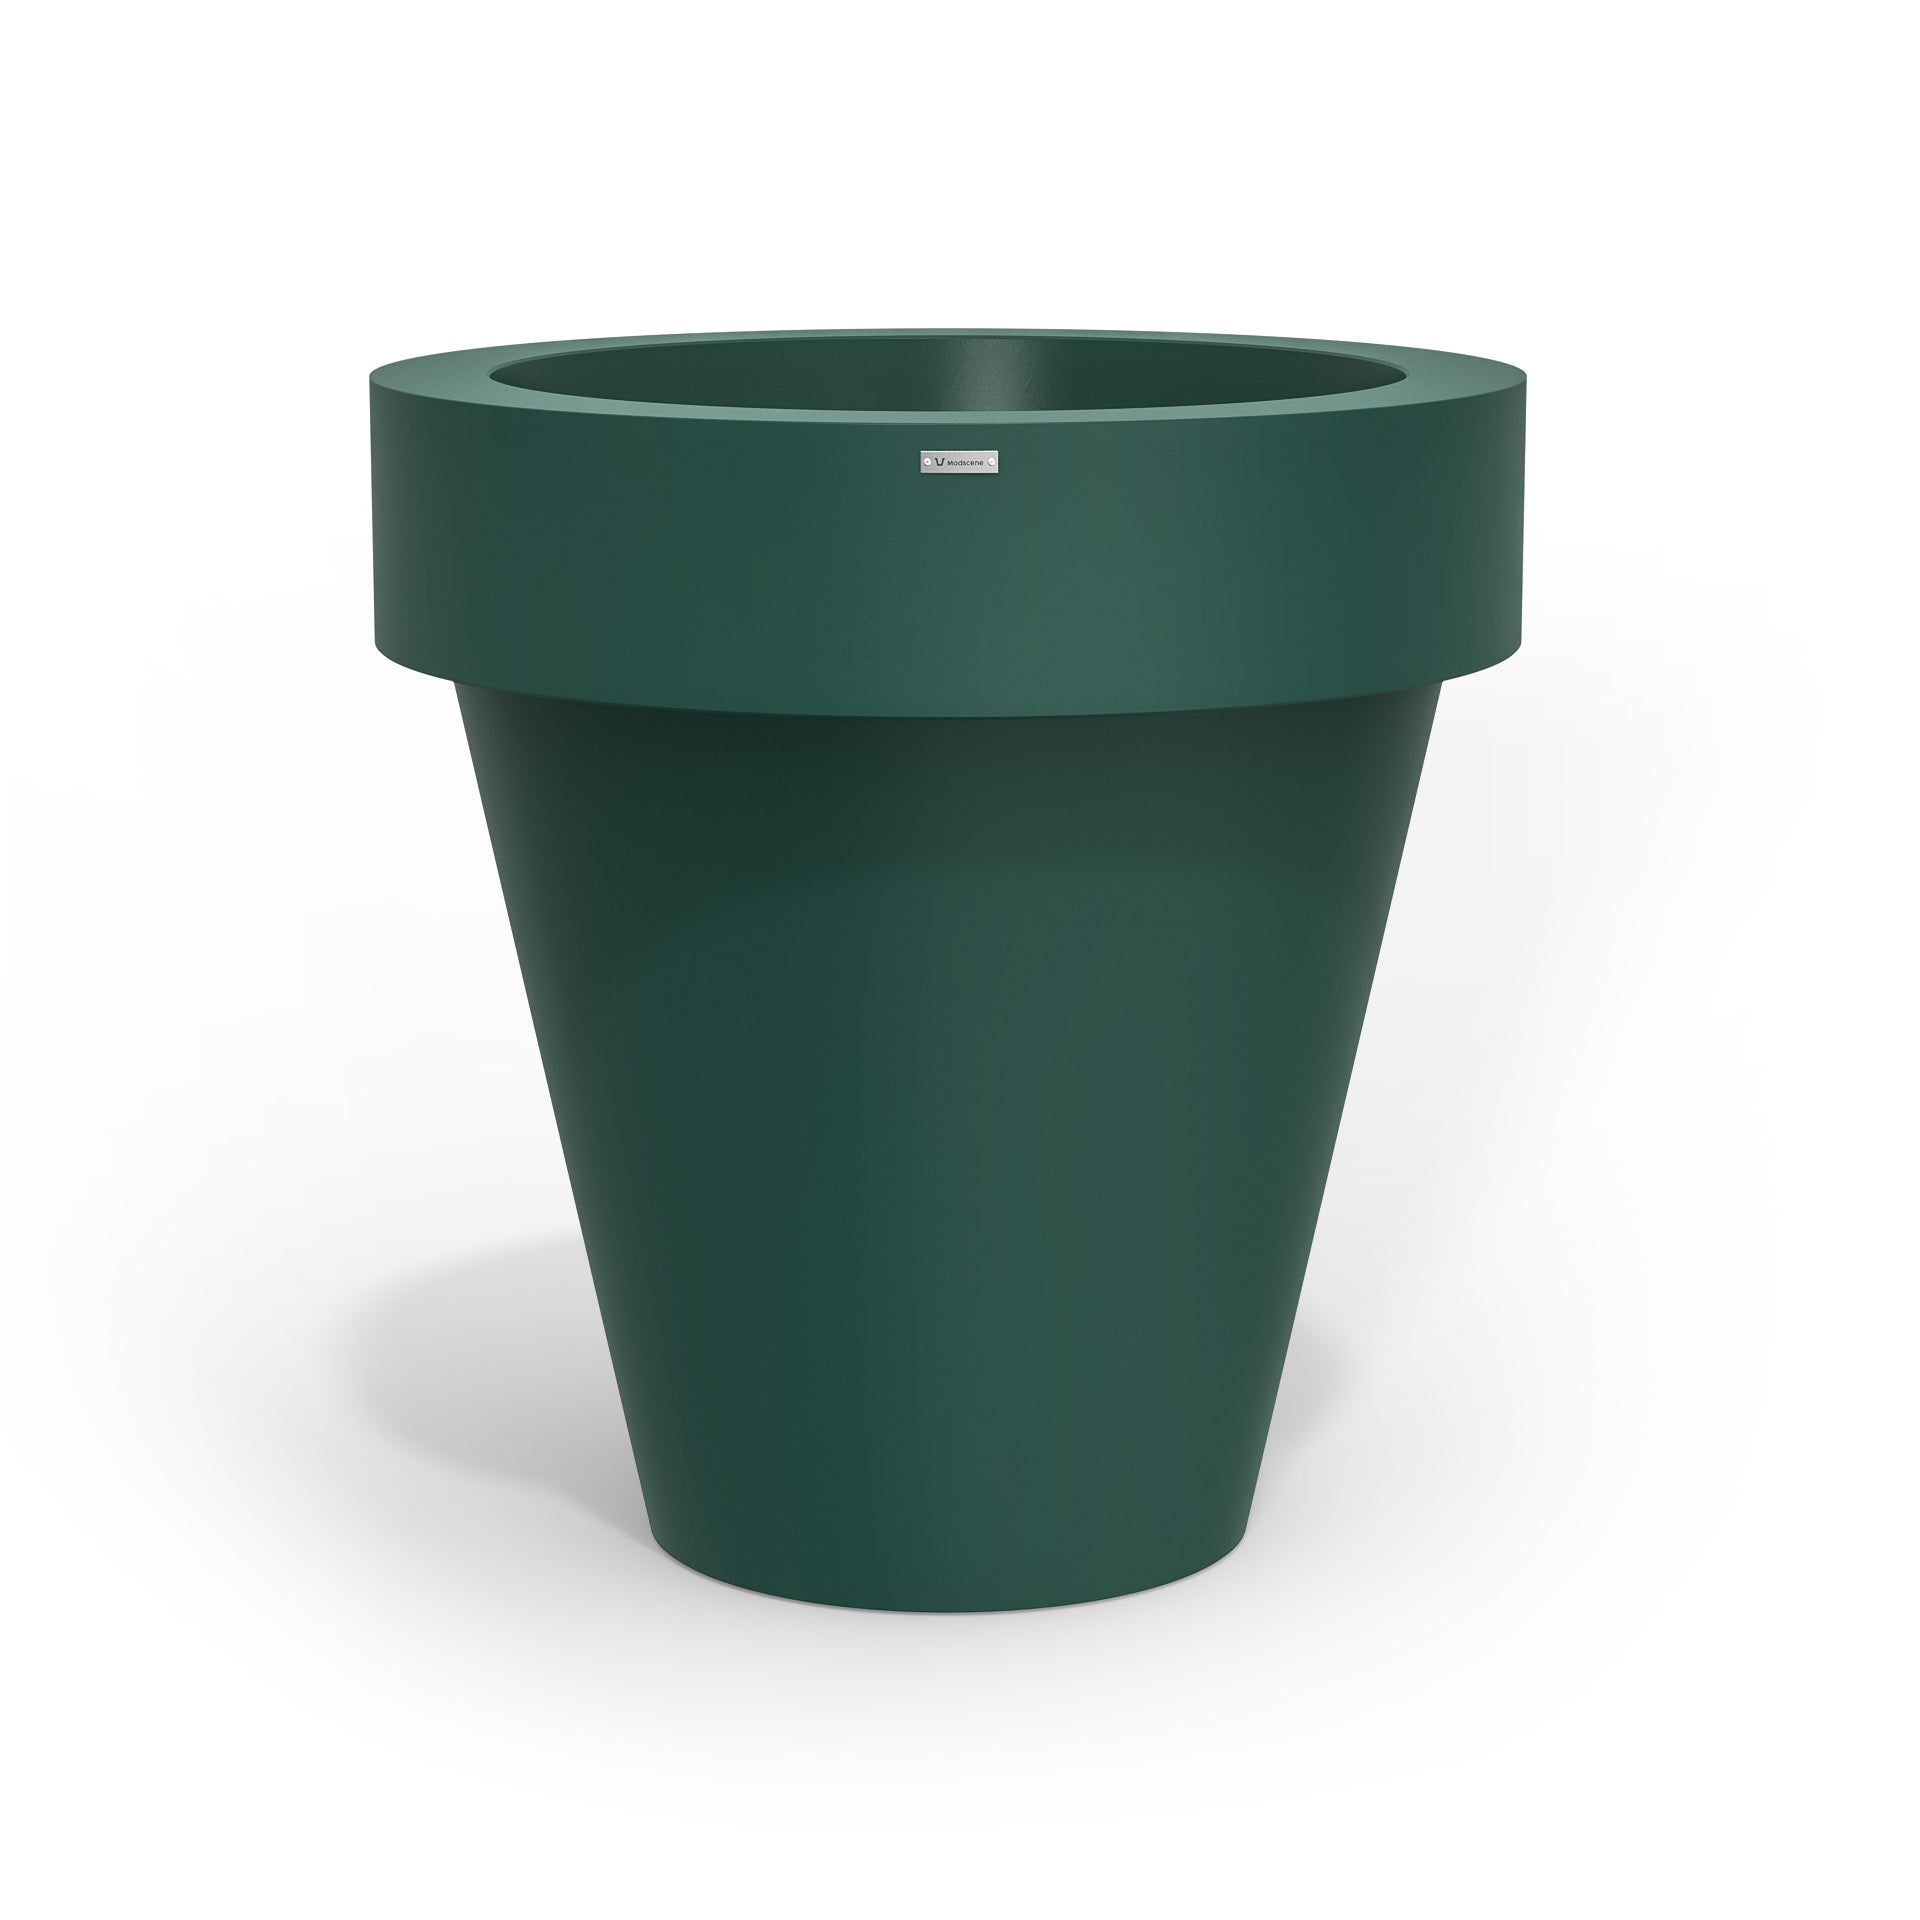 Extra large Modscene planter pot in a emerald green colour. NZ made.